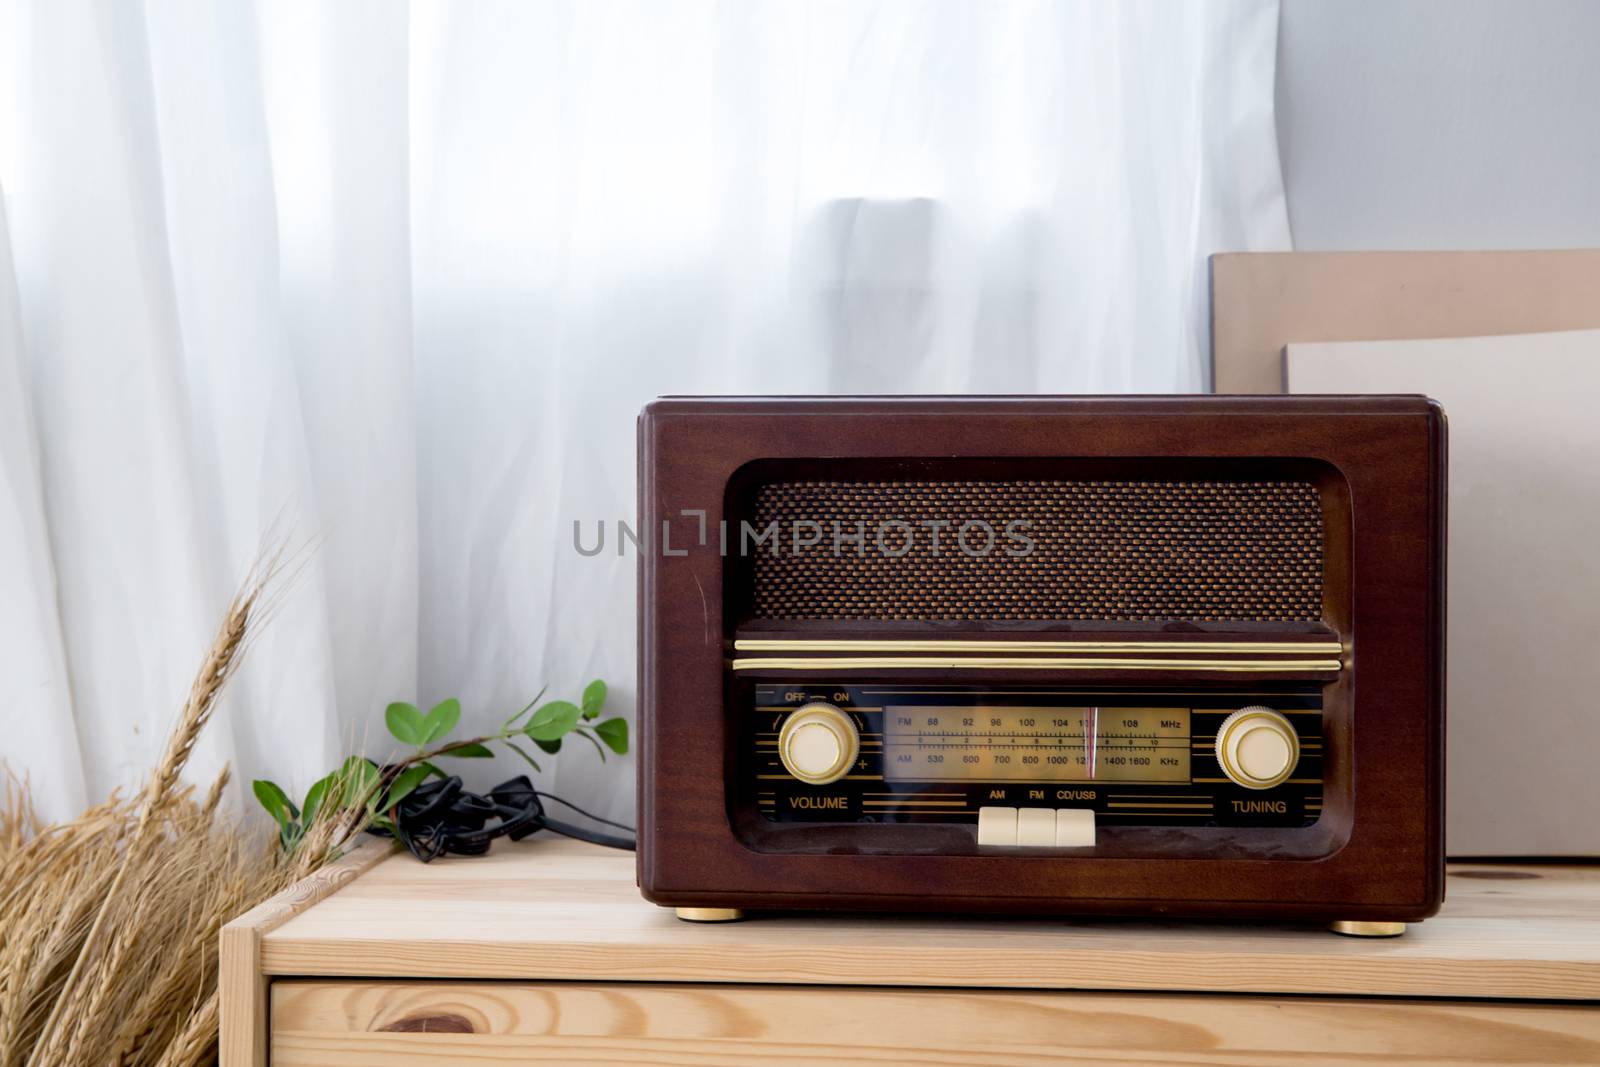 old vintage radio with shelf on the wooden cabinet.